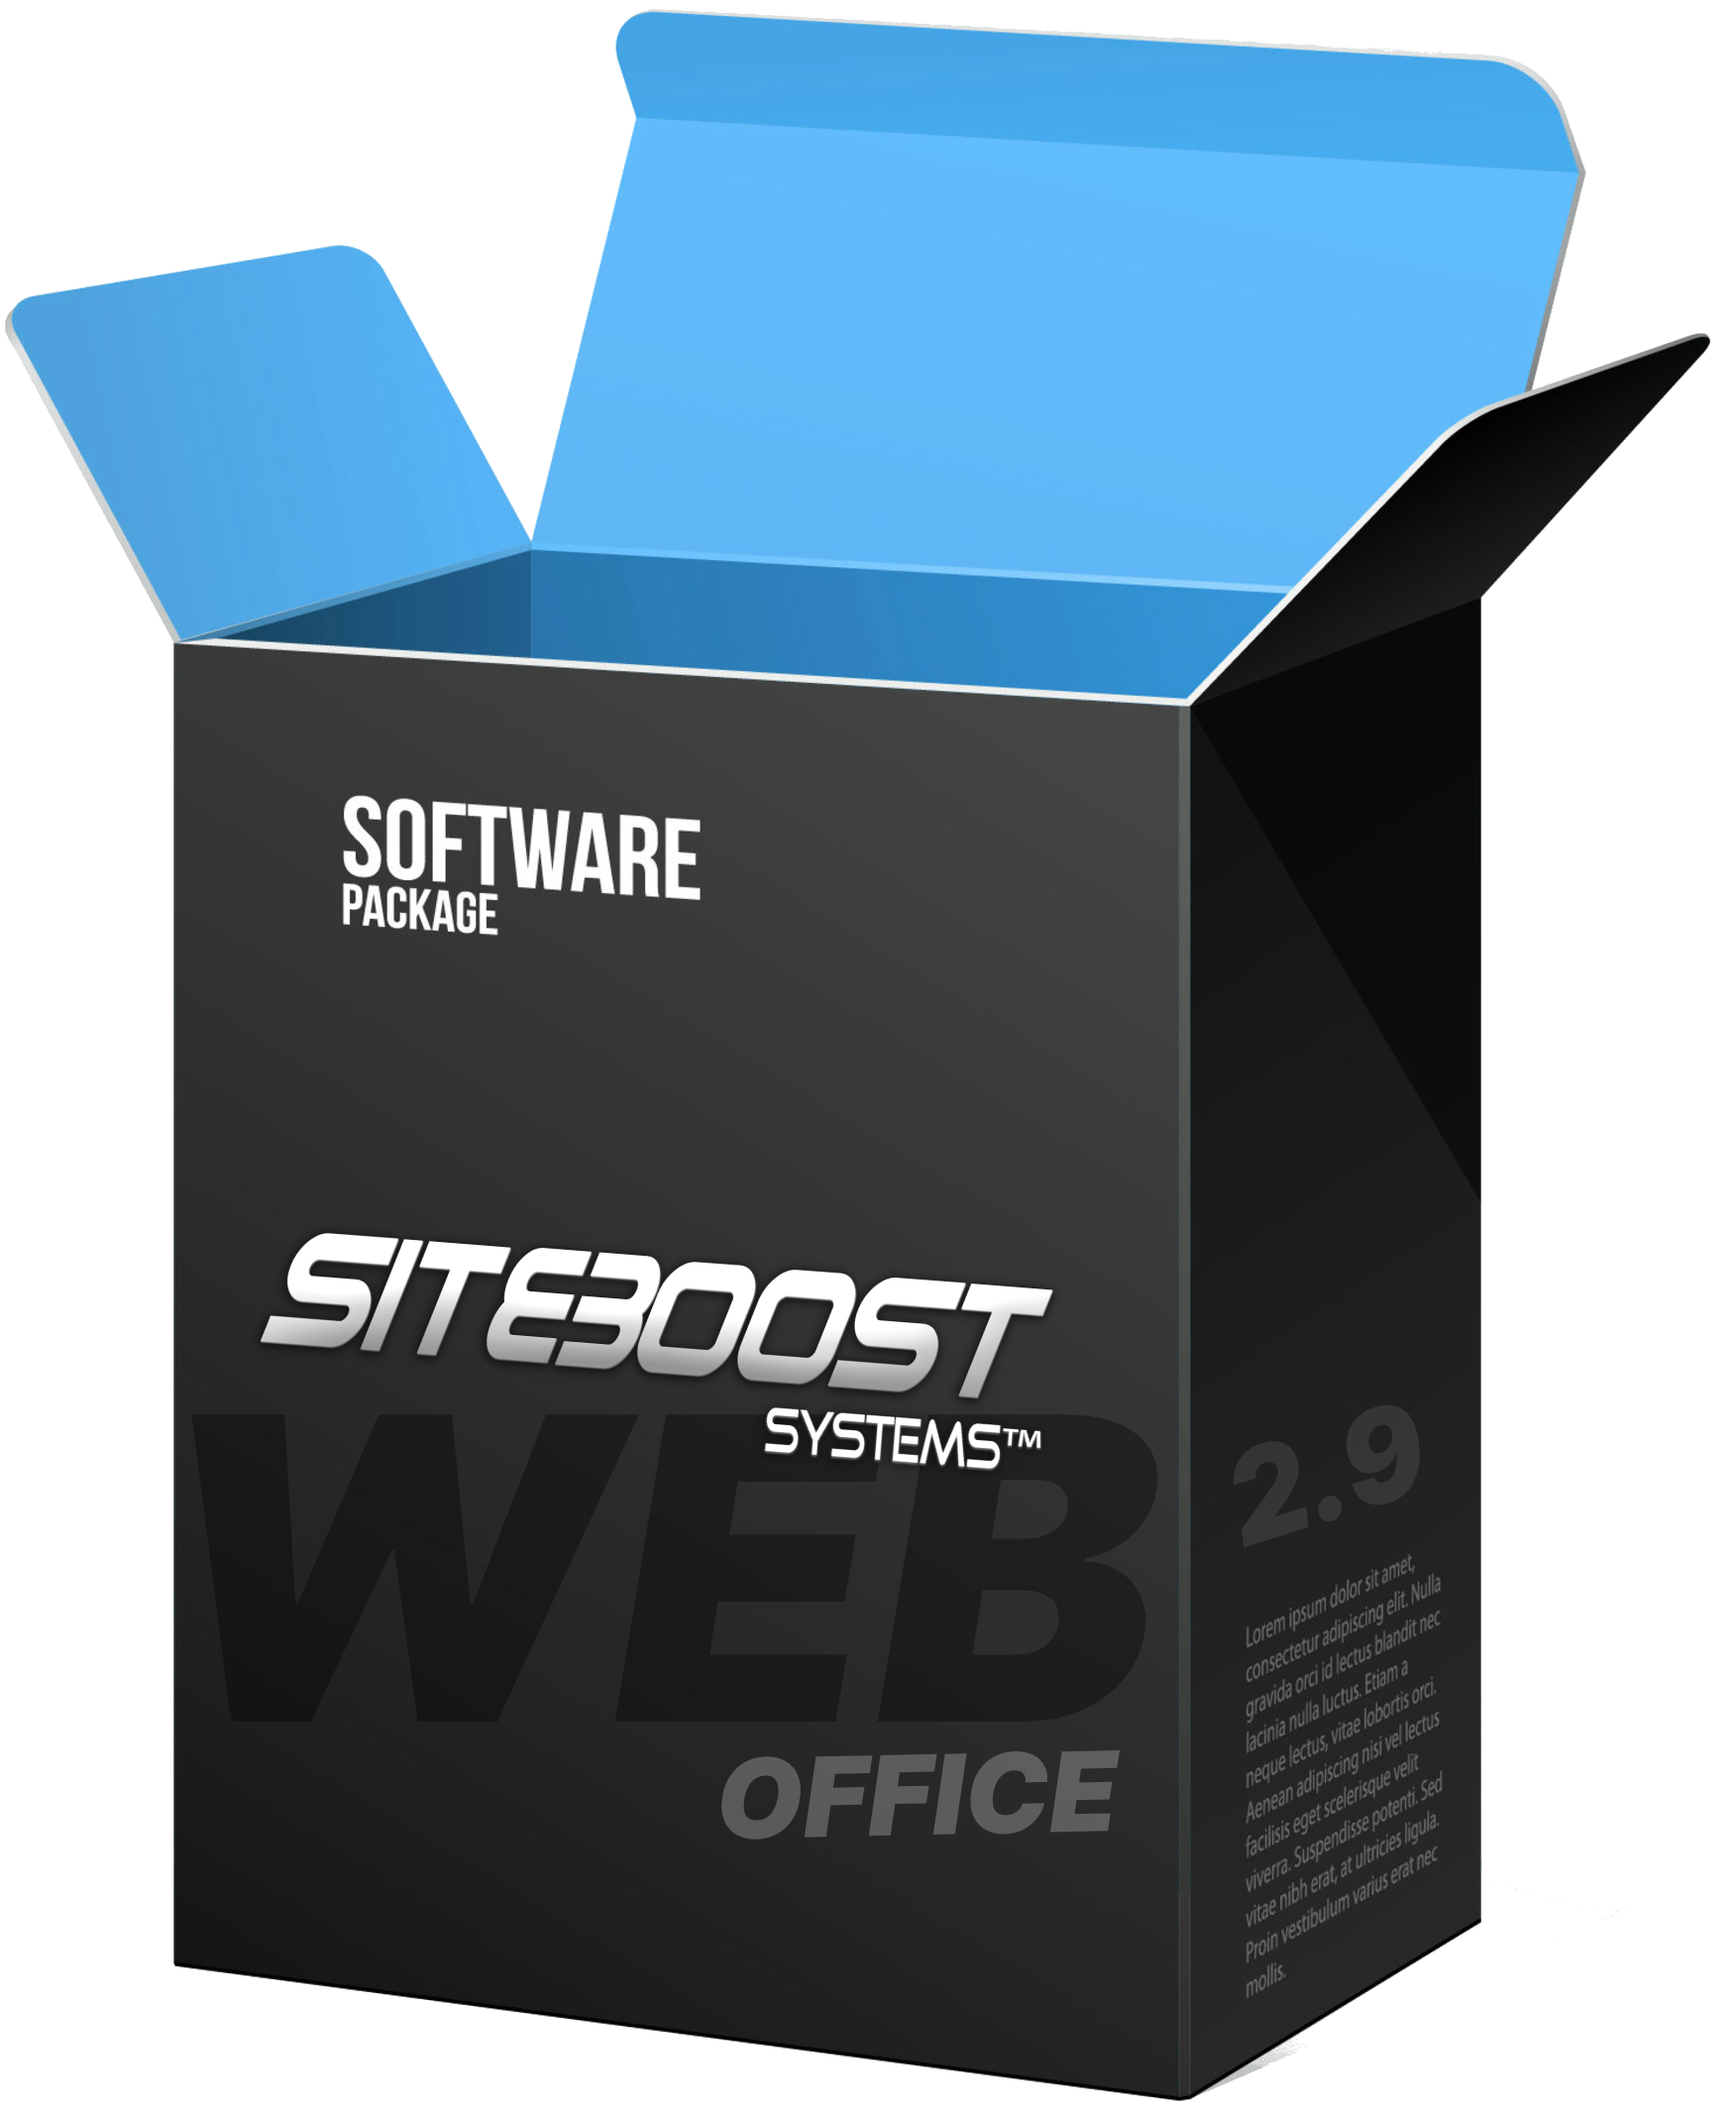 https://siteboostsystems.com/weboffice/product_images/2021-01-25 14:36:21_software-package-png-7.png